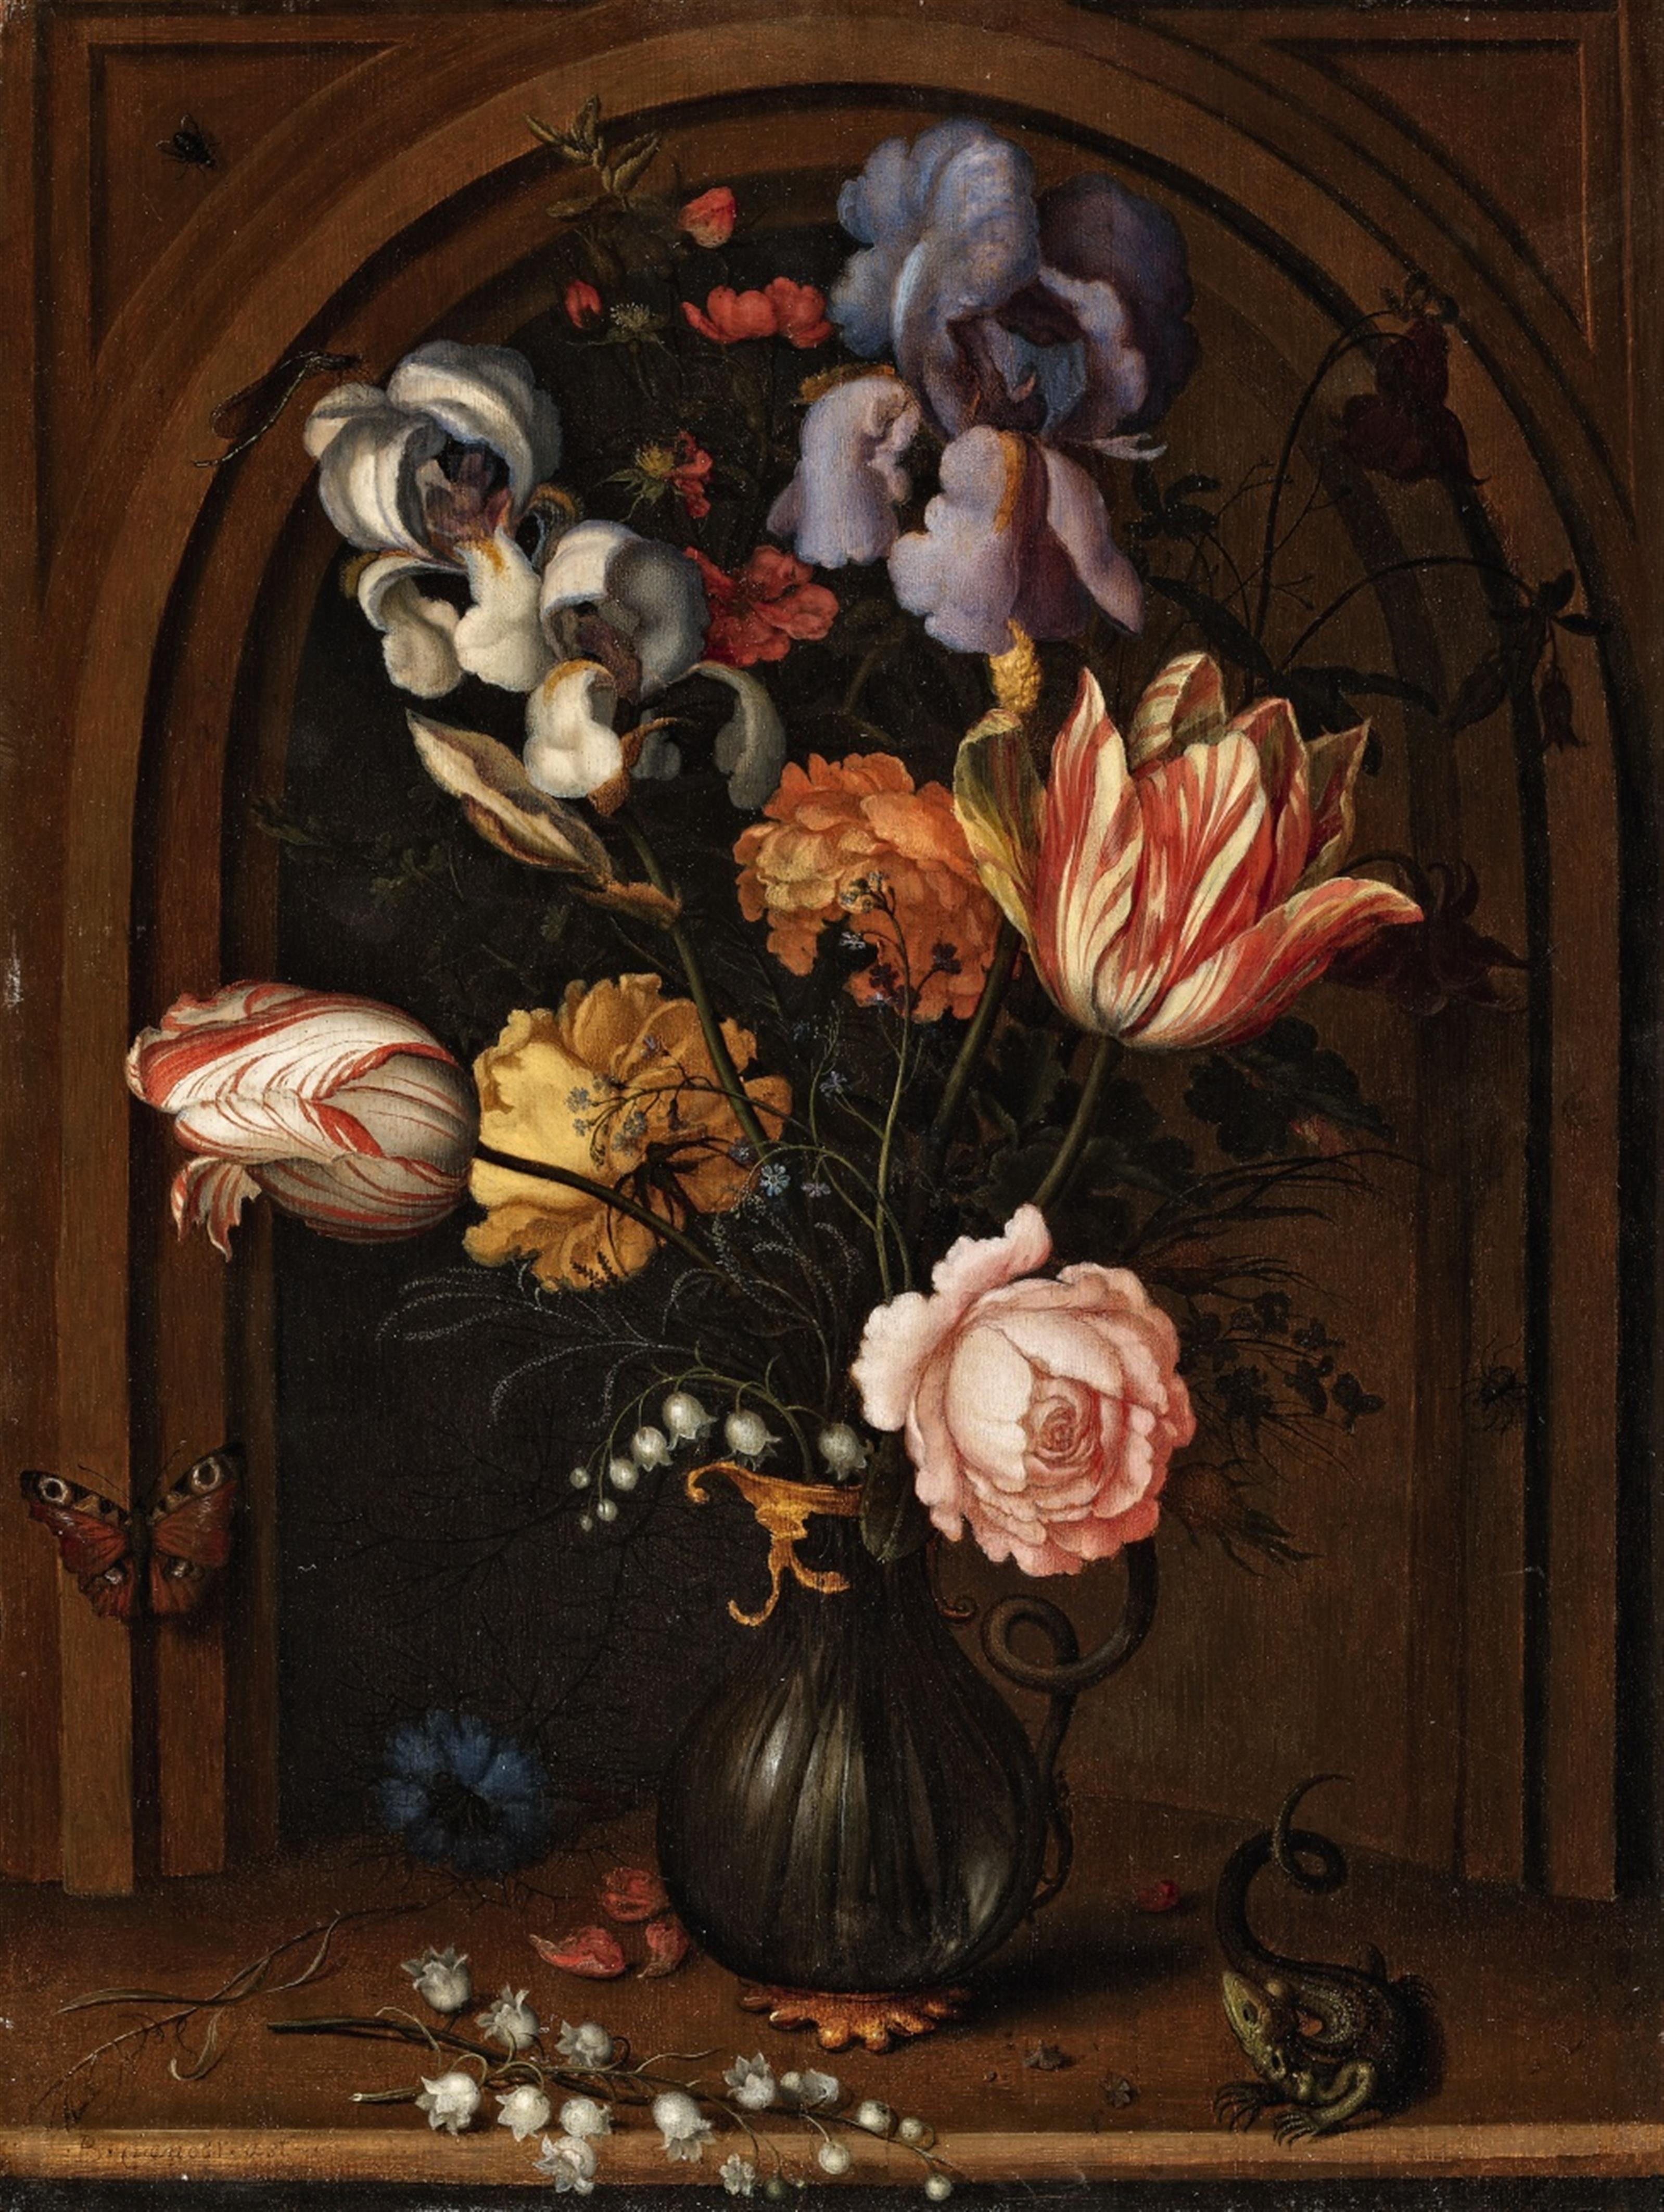 Balthasar van der Ast - A Vase of Flowers in a Niche with a Butterfly, Fly, Dragonfly and a Lizard - image-1